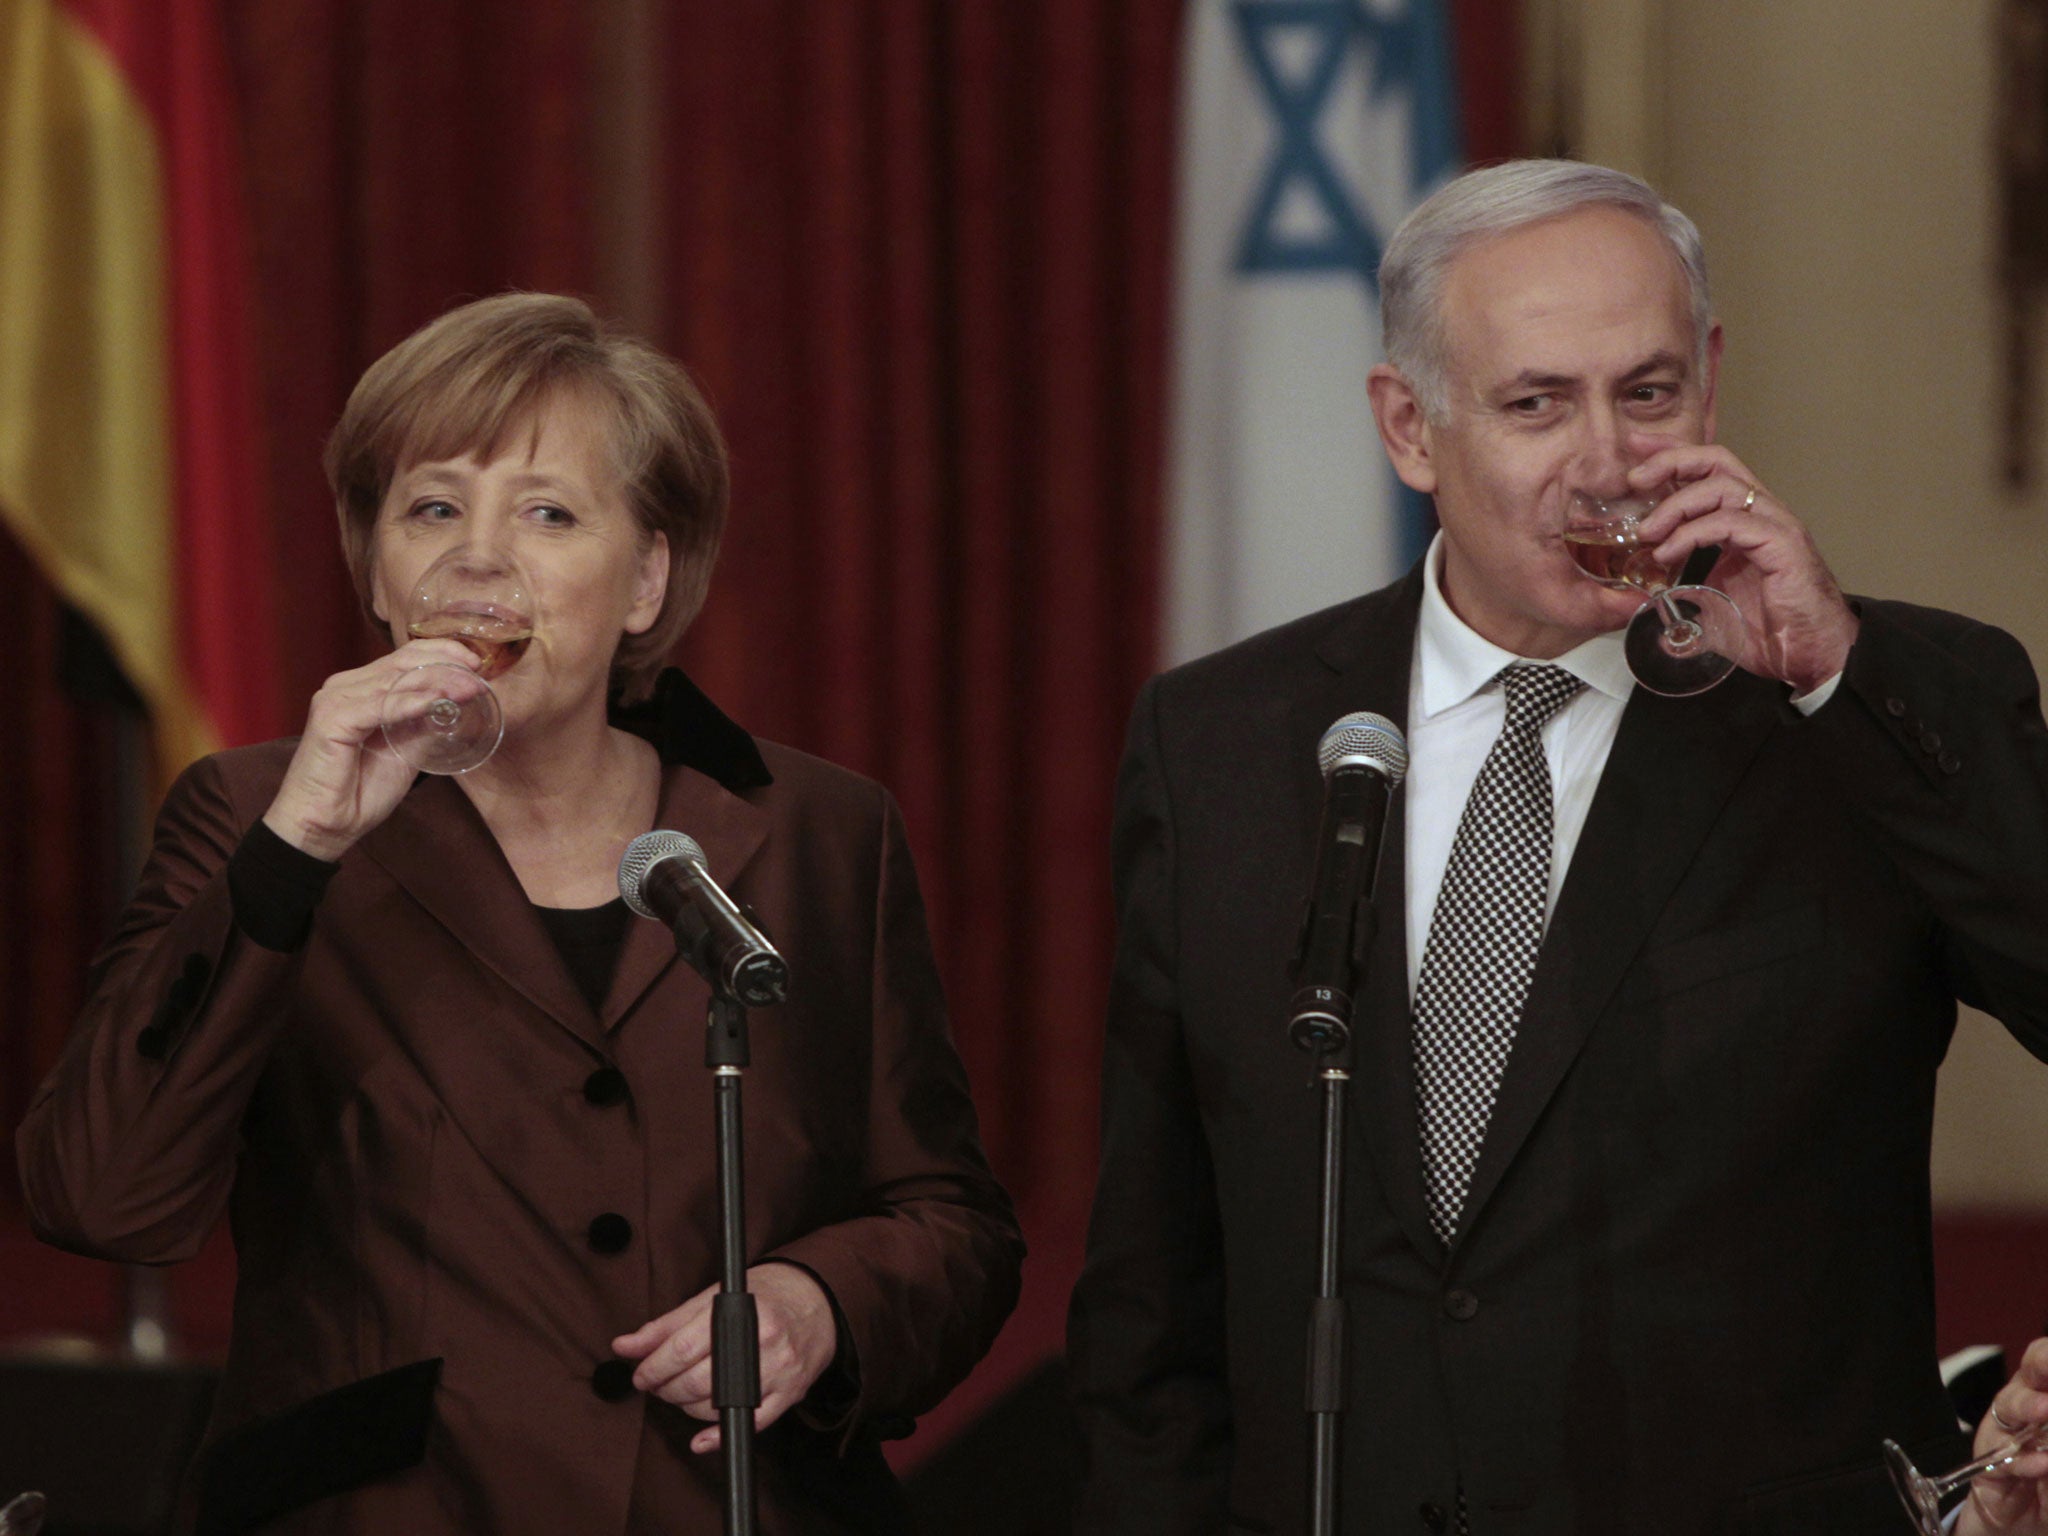 Israeli Prime Minister Benjamin Netanyahu and German Chancellor Angela Merkel take a sip after raising a toast prior to a joint dinner in Jerusalem, on January 31, 2011.